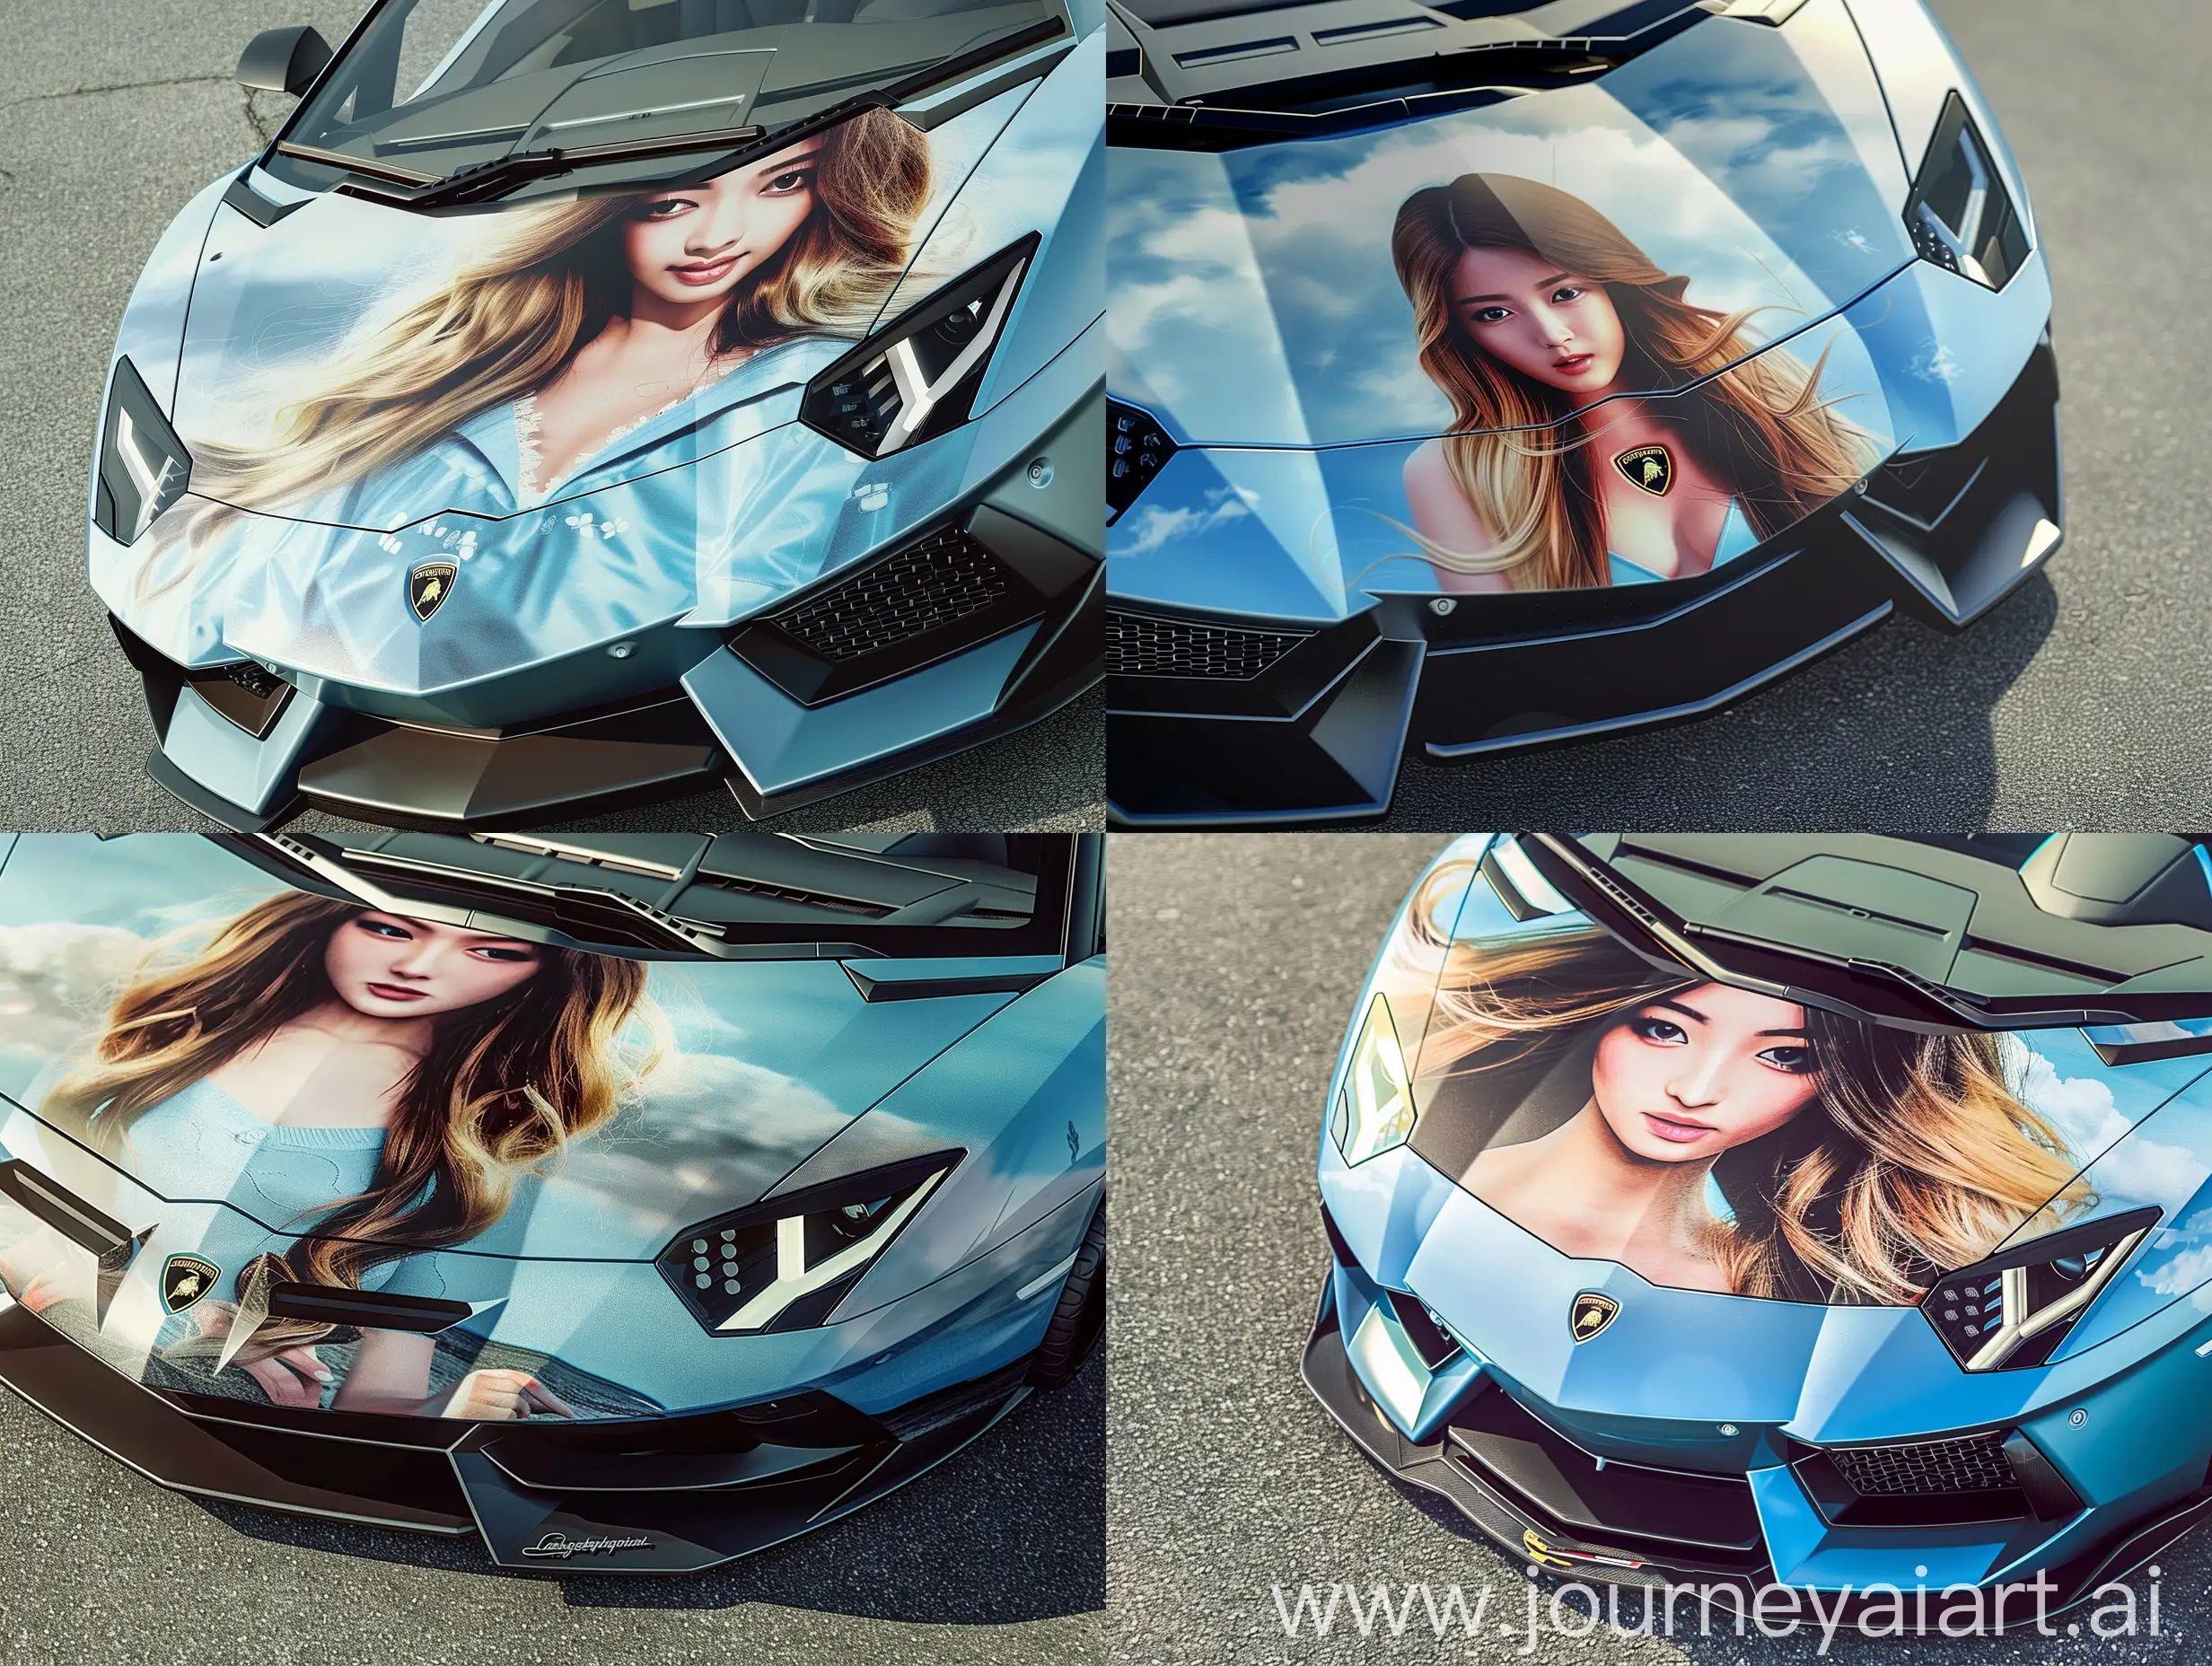 The image showcases the front end of a lamborghini revuelto, featuring a hyper-realistic, realistic beutiful blonde wrap on the hood by an unidentified artist. The composition highlights the car's sleek and aggressive design, with sharp headlights and a prominent logo. The subject of the wrap is a young woman with long, flowing hair, wearing a light blue outfit, creating a striking contrast against the car's surface. The background shows the car on an asphalt surface, suggesting a setting suitable for a photo shoot. The vivid colors of the wrap stand out, drawing attention to the detailed and expressive illustration amidst the otherwise monochromatic environment, ultra-realistic, ultra-detailed